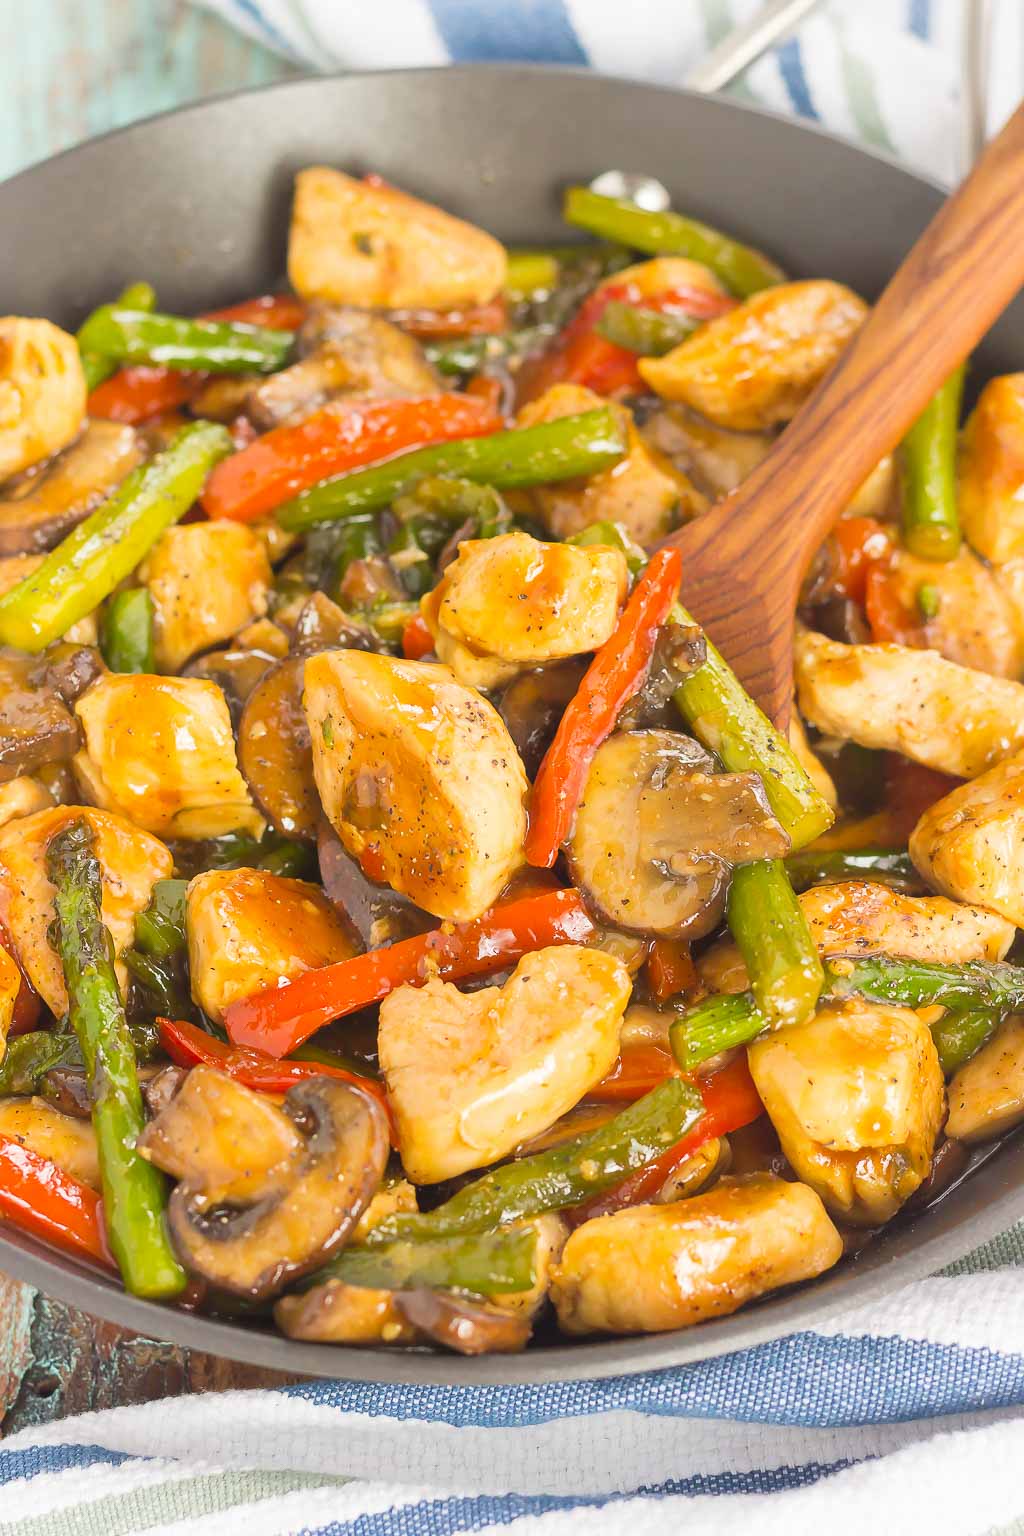 This Honey Garlic Chicken Stir-Fry is an easy, one pan meal that's ready in just 30 minutes. Fresh veggies and chicken are tossed in a sweet and savory sauce that's seasoned to perfection. This simple meal is a dish that the whole family will enjoy!